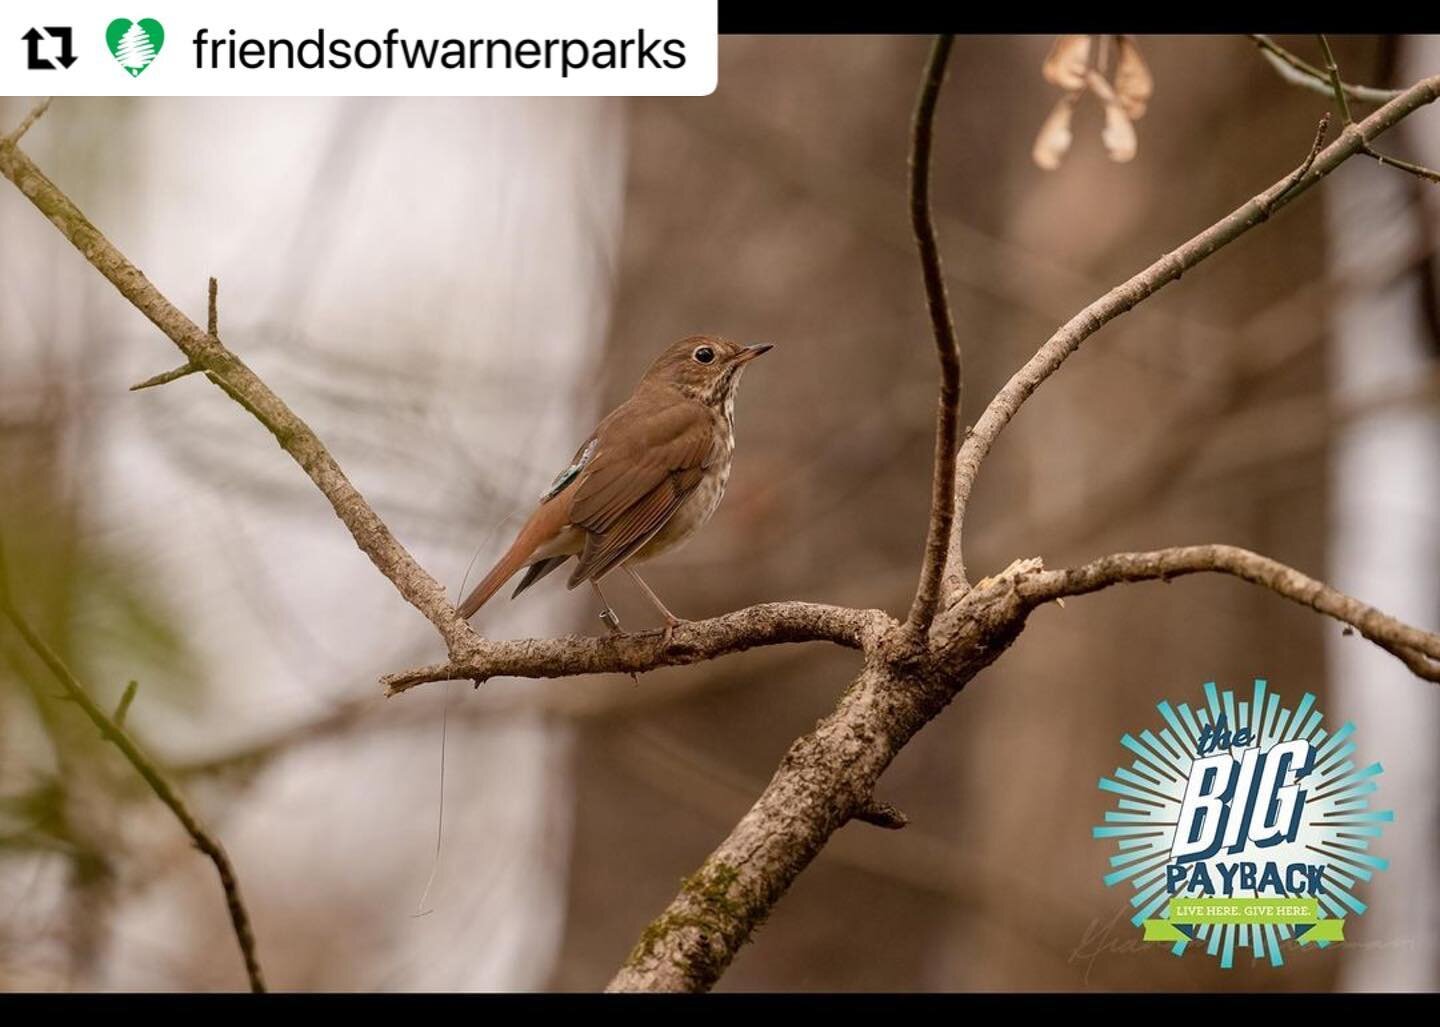 #Repost @friendsofwarnerparks
・・・
Donate through the Big Payback and watch your gift take flight; up to $12,500 will be matched by the Barbara J. Mapp Foundation in support of our B.I.R.D. program. Protect the birds, #ProtectWarnerParks. Link in bio!